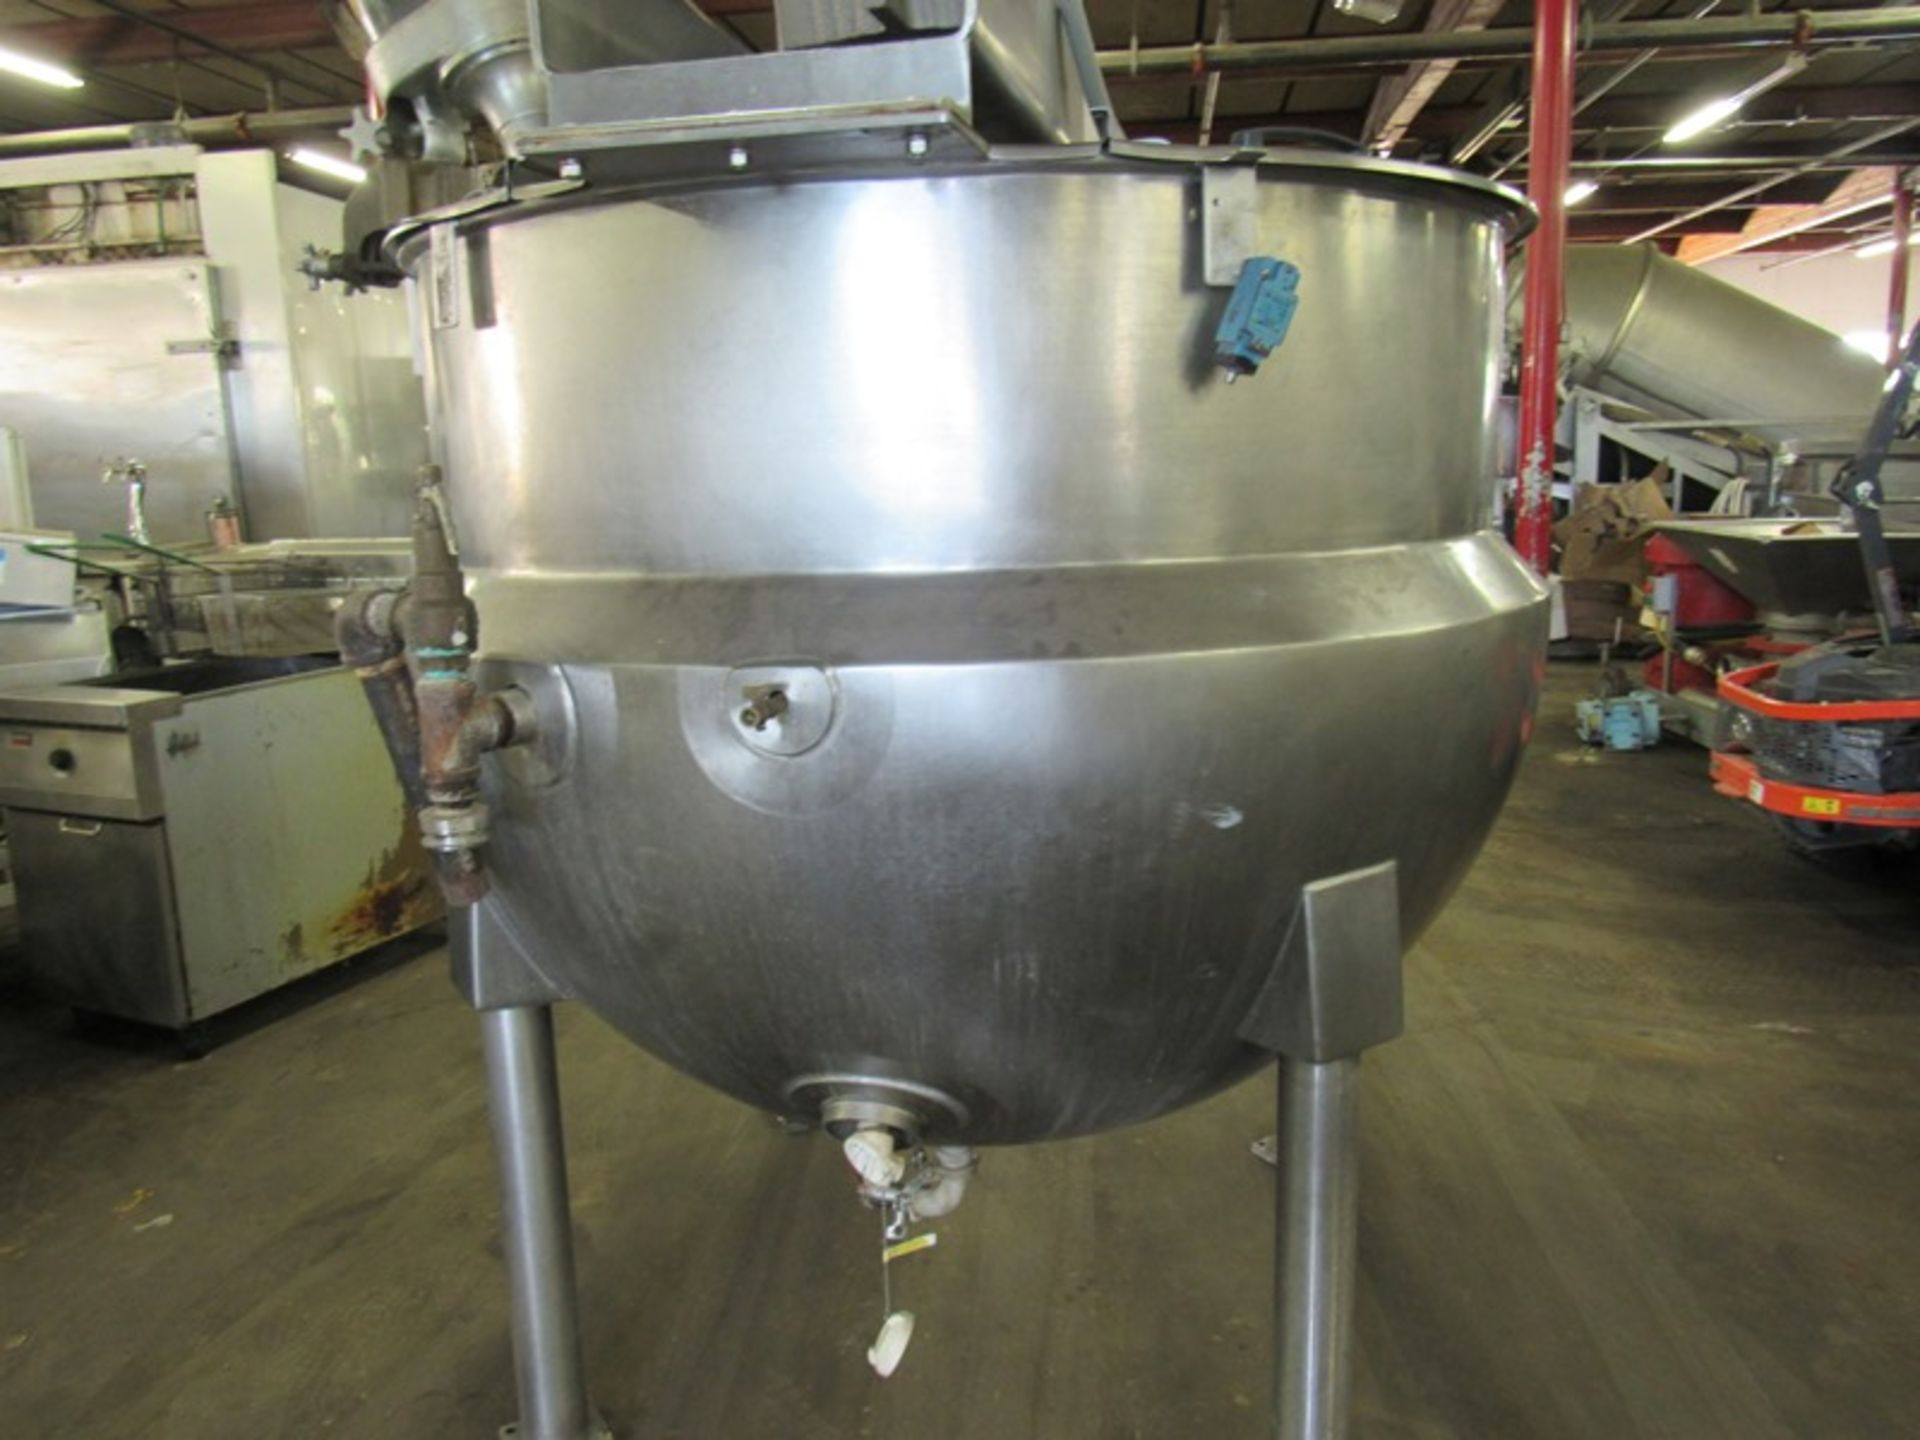 Hamilton Stainless Steel Jacketed Kettle with side bottom scrape agitation, stainless steel mixer - Image 3 of 23